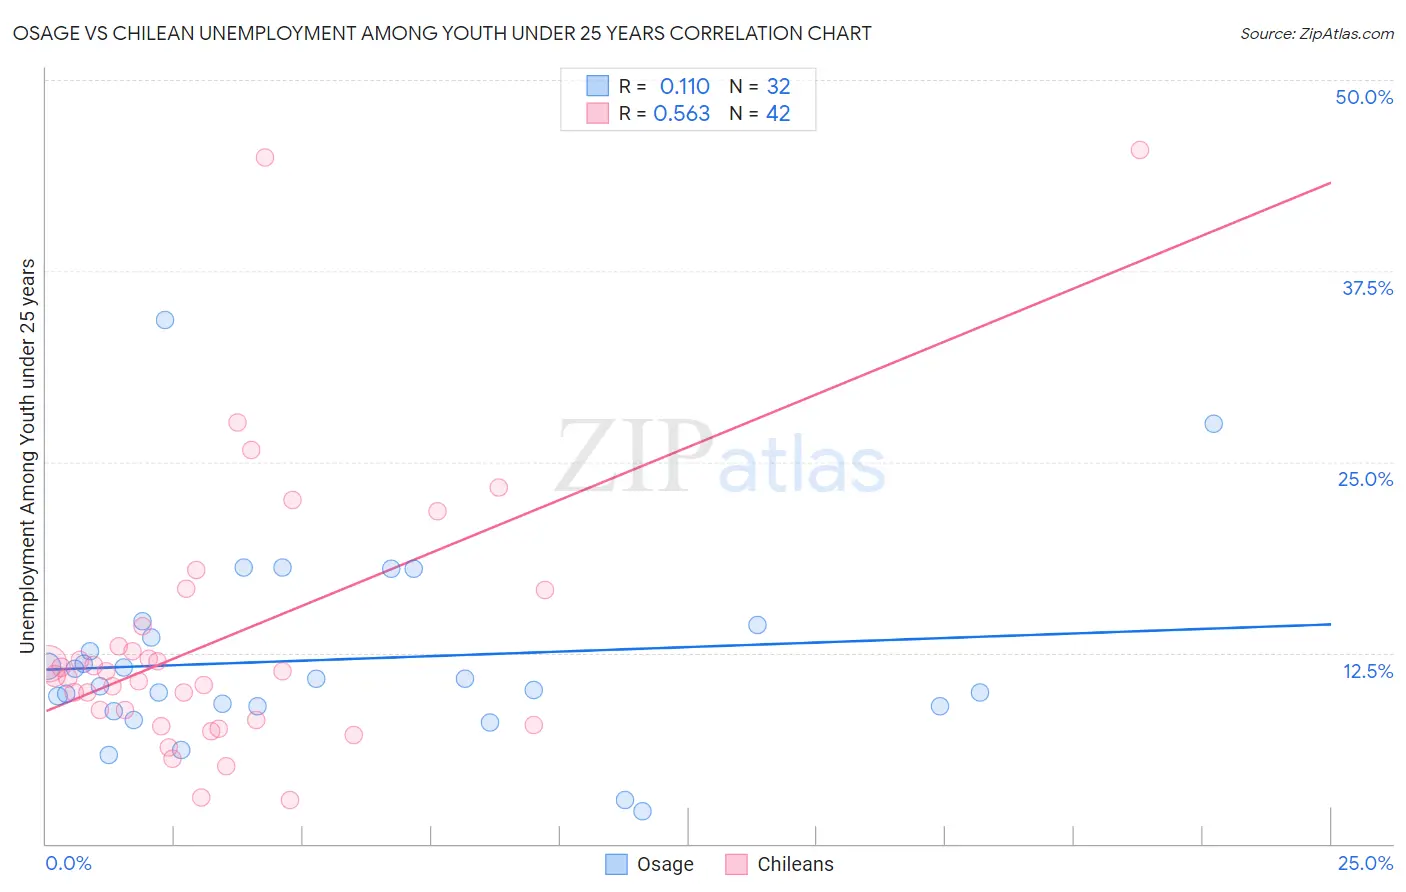 Osage vs Chilean Unemployment Among Youth under 25 years